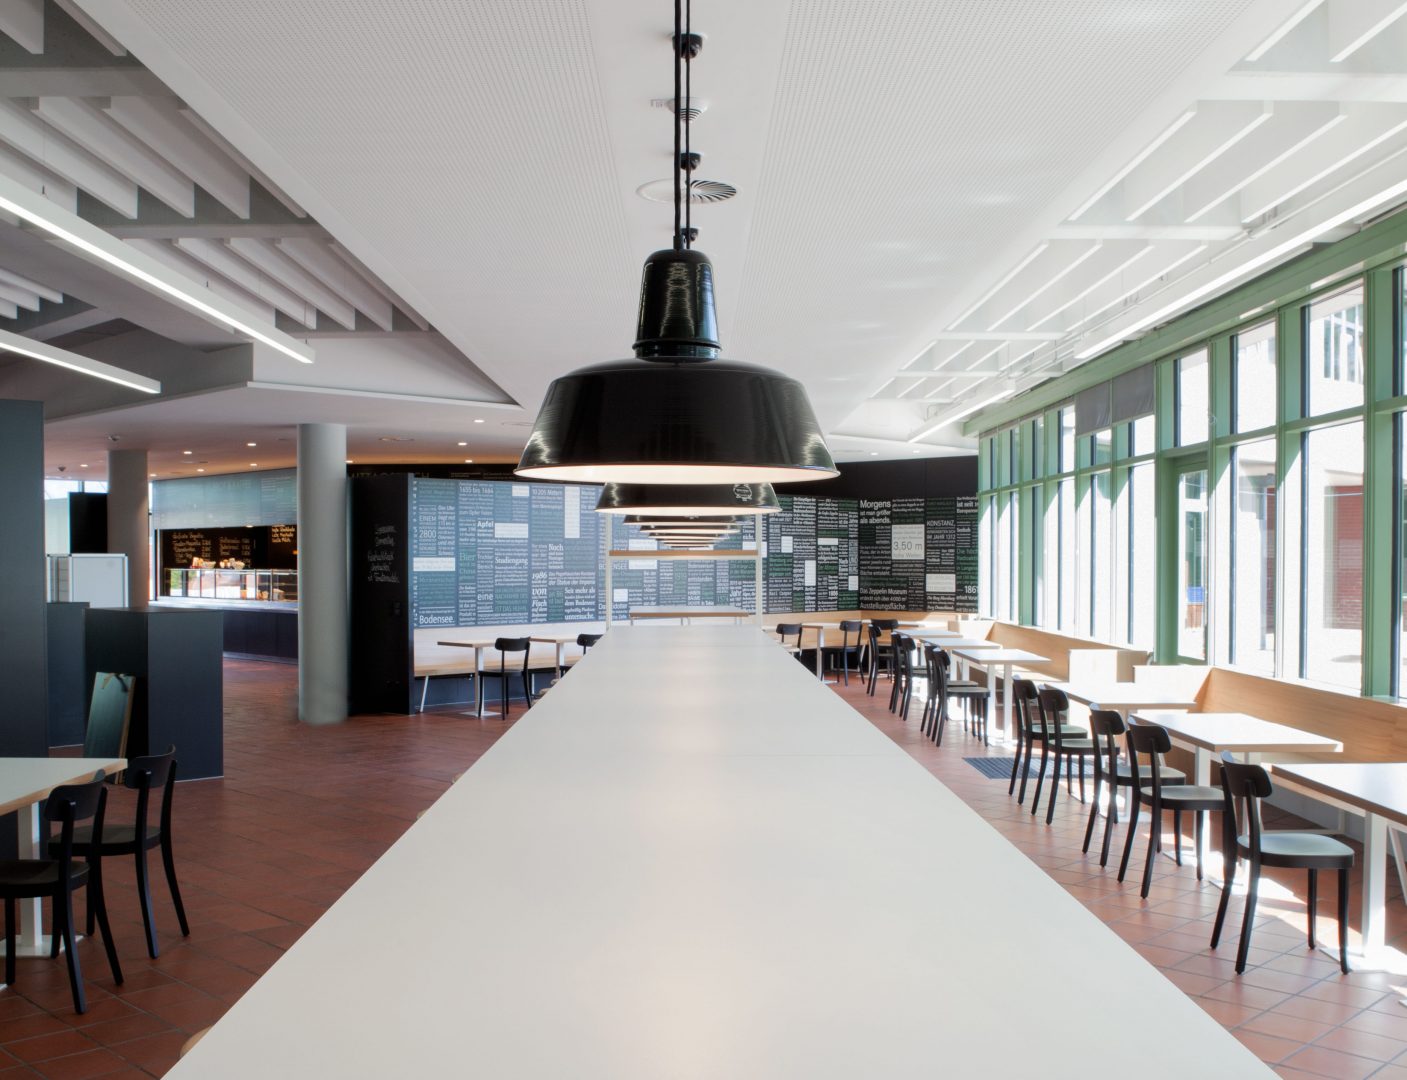 Table in the school canteen of the vocational school centre Friedrichshafen designed by atelier 522.